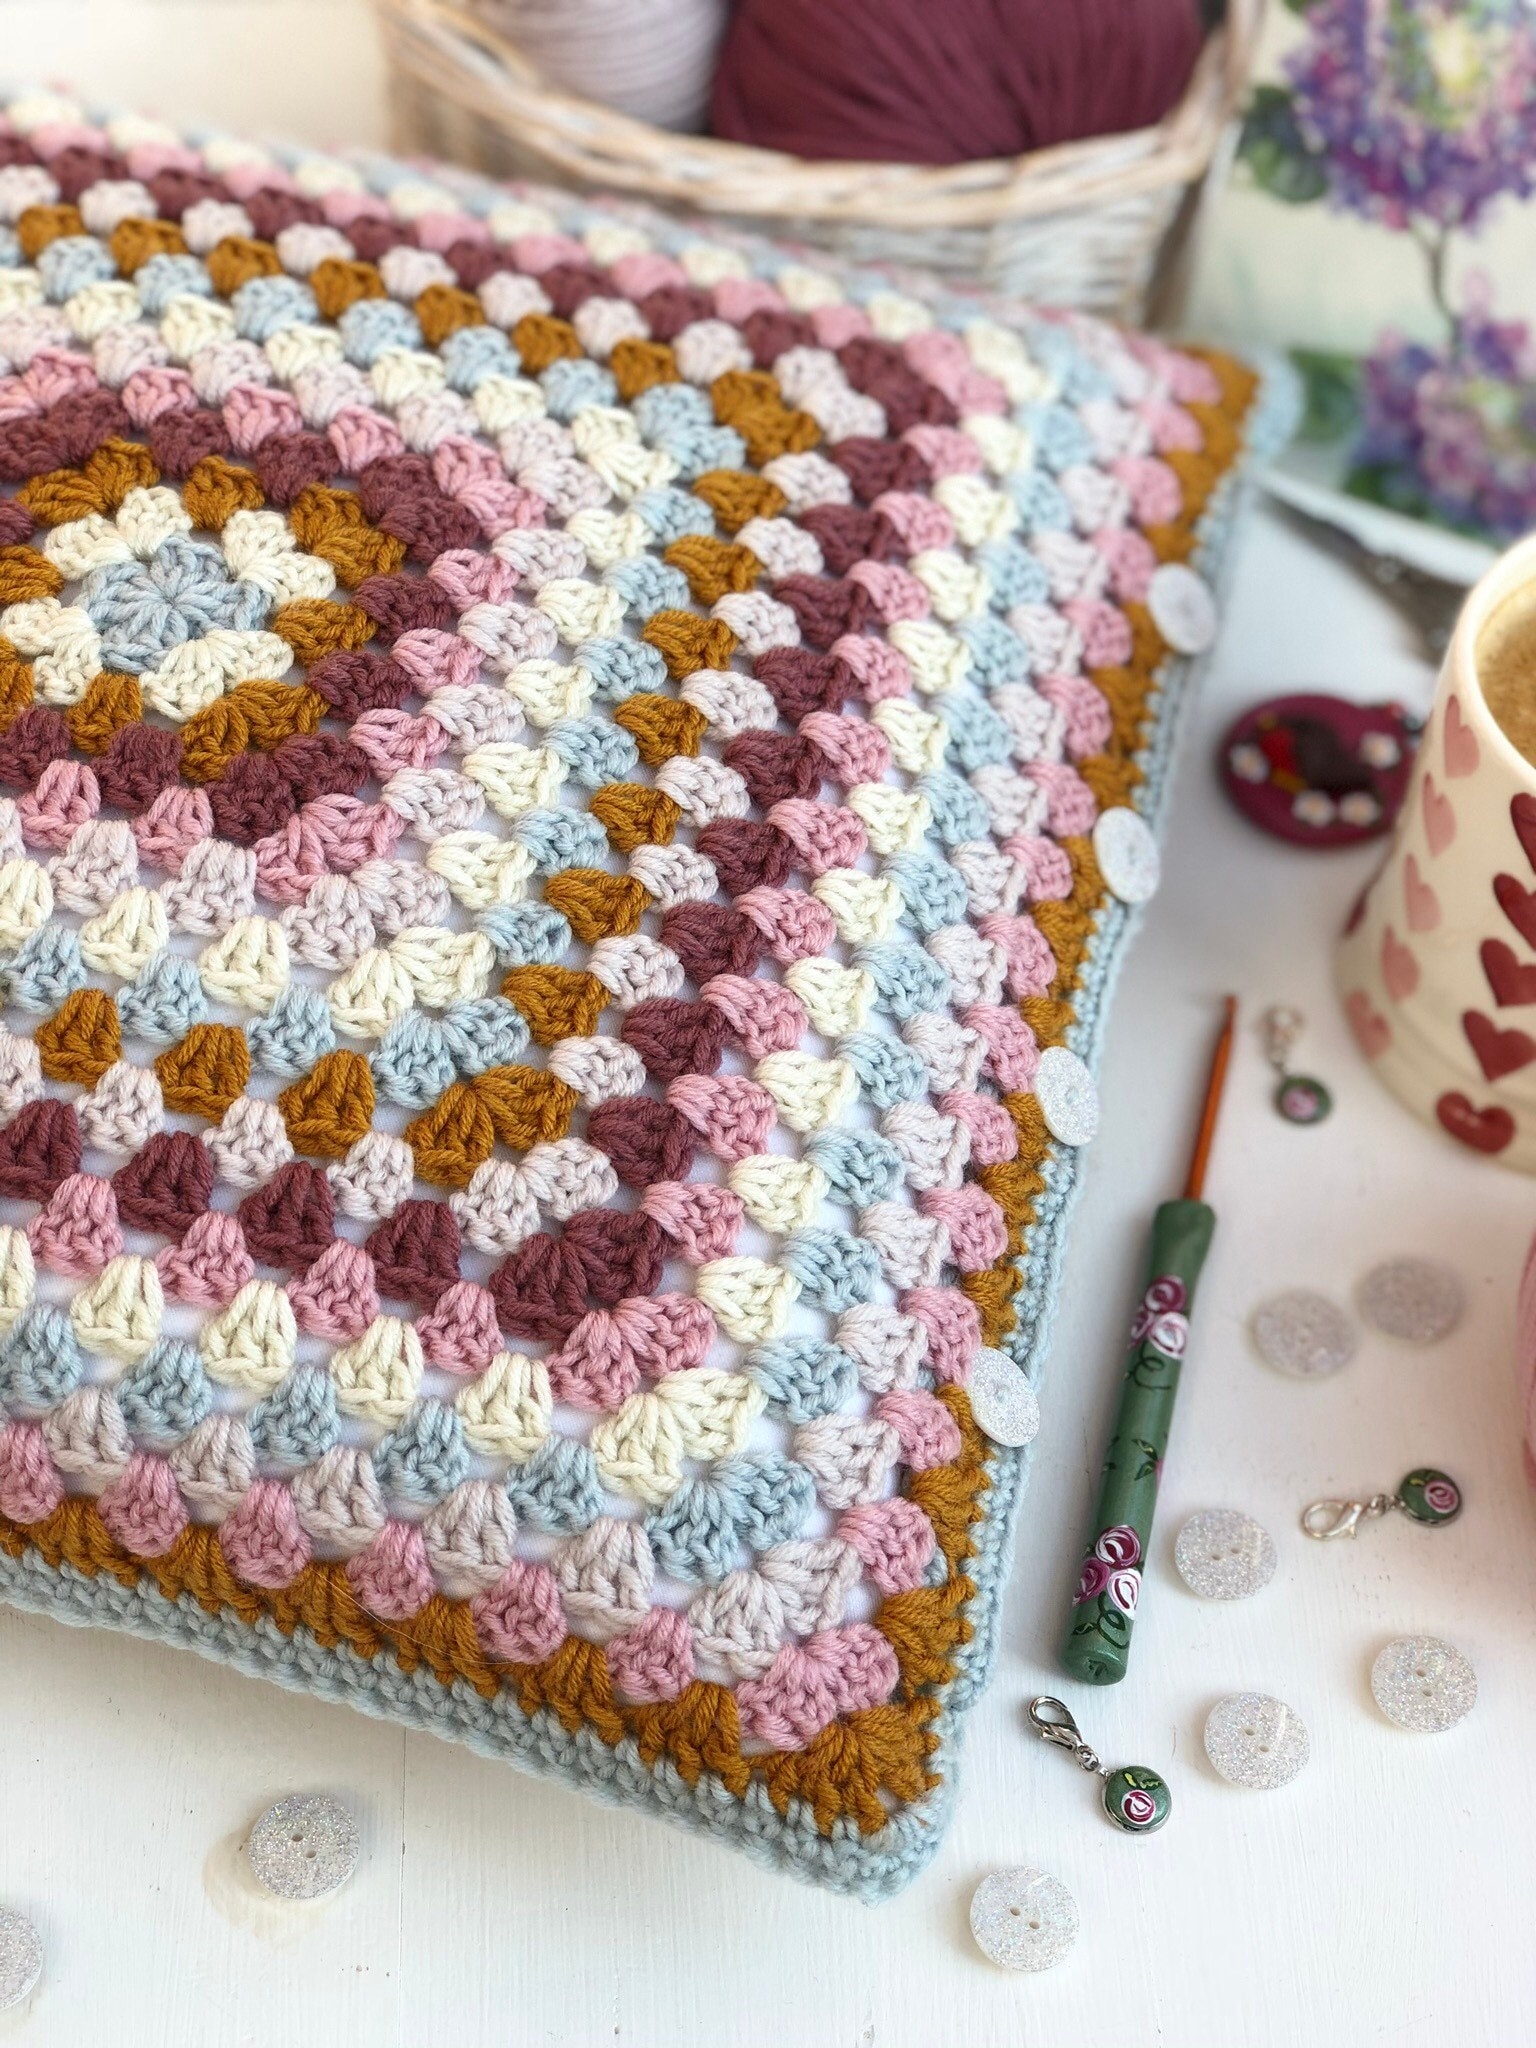 How to Make a Granny Square Pillow + Free Pattern